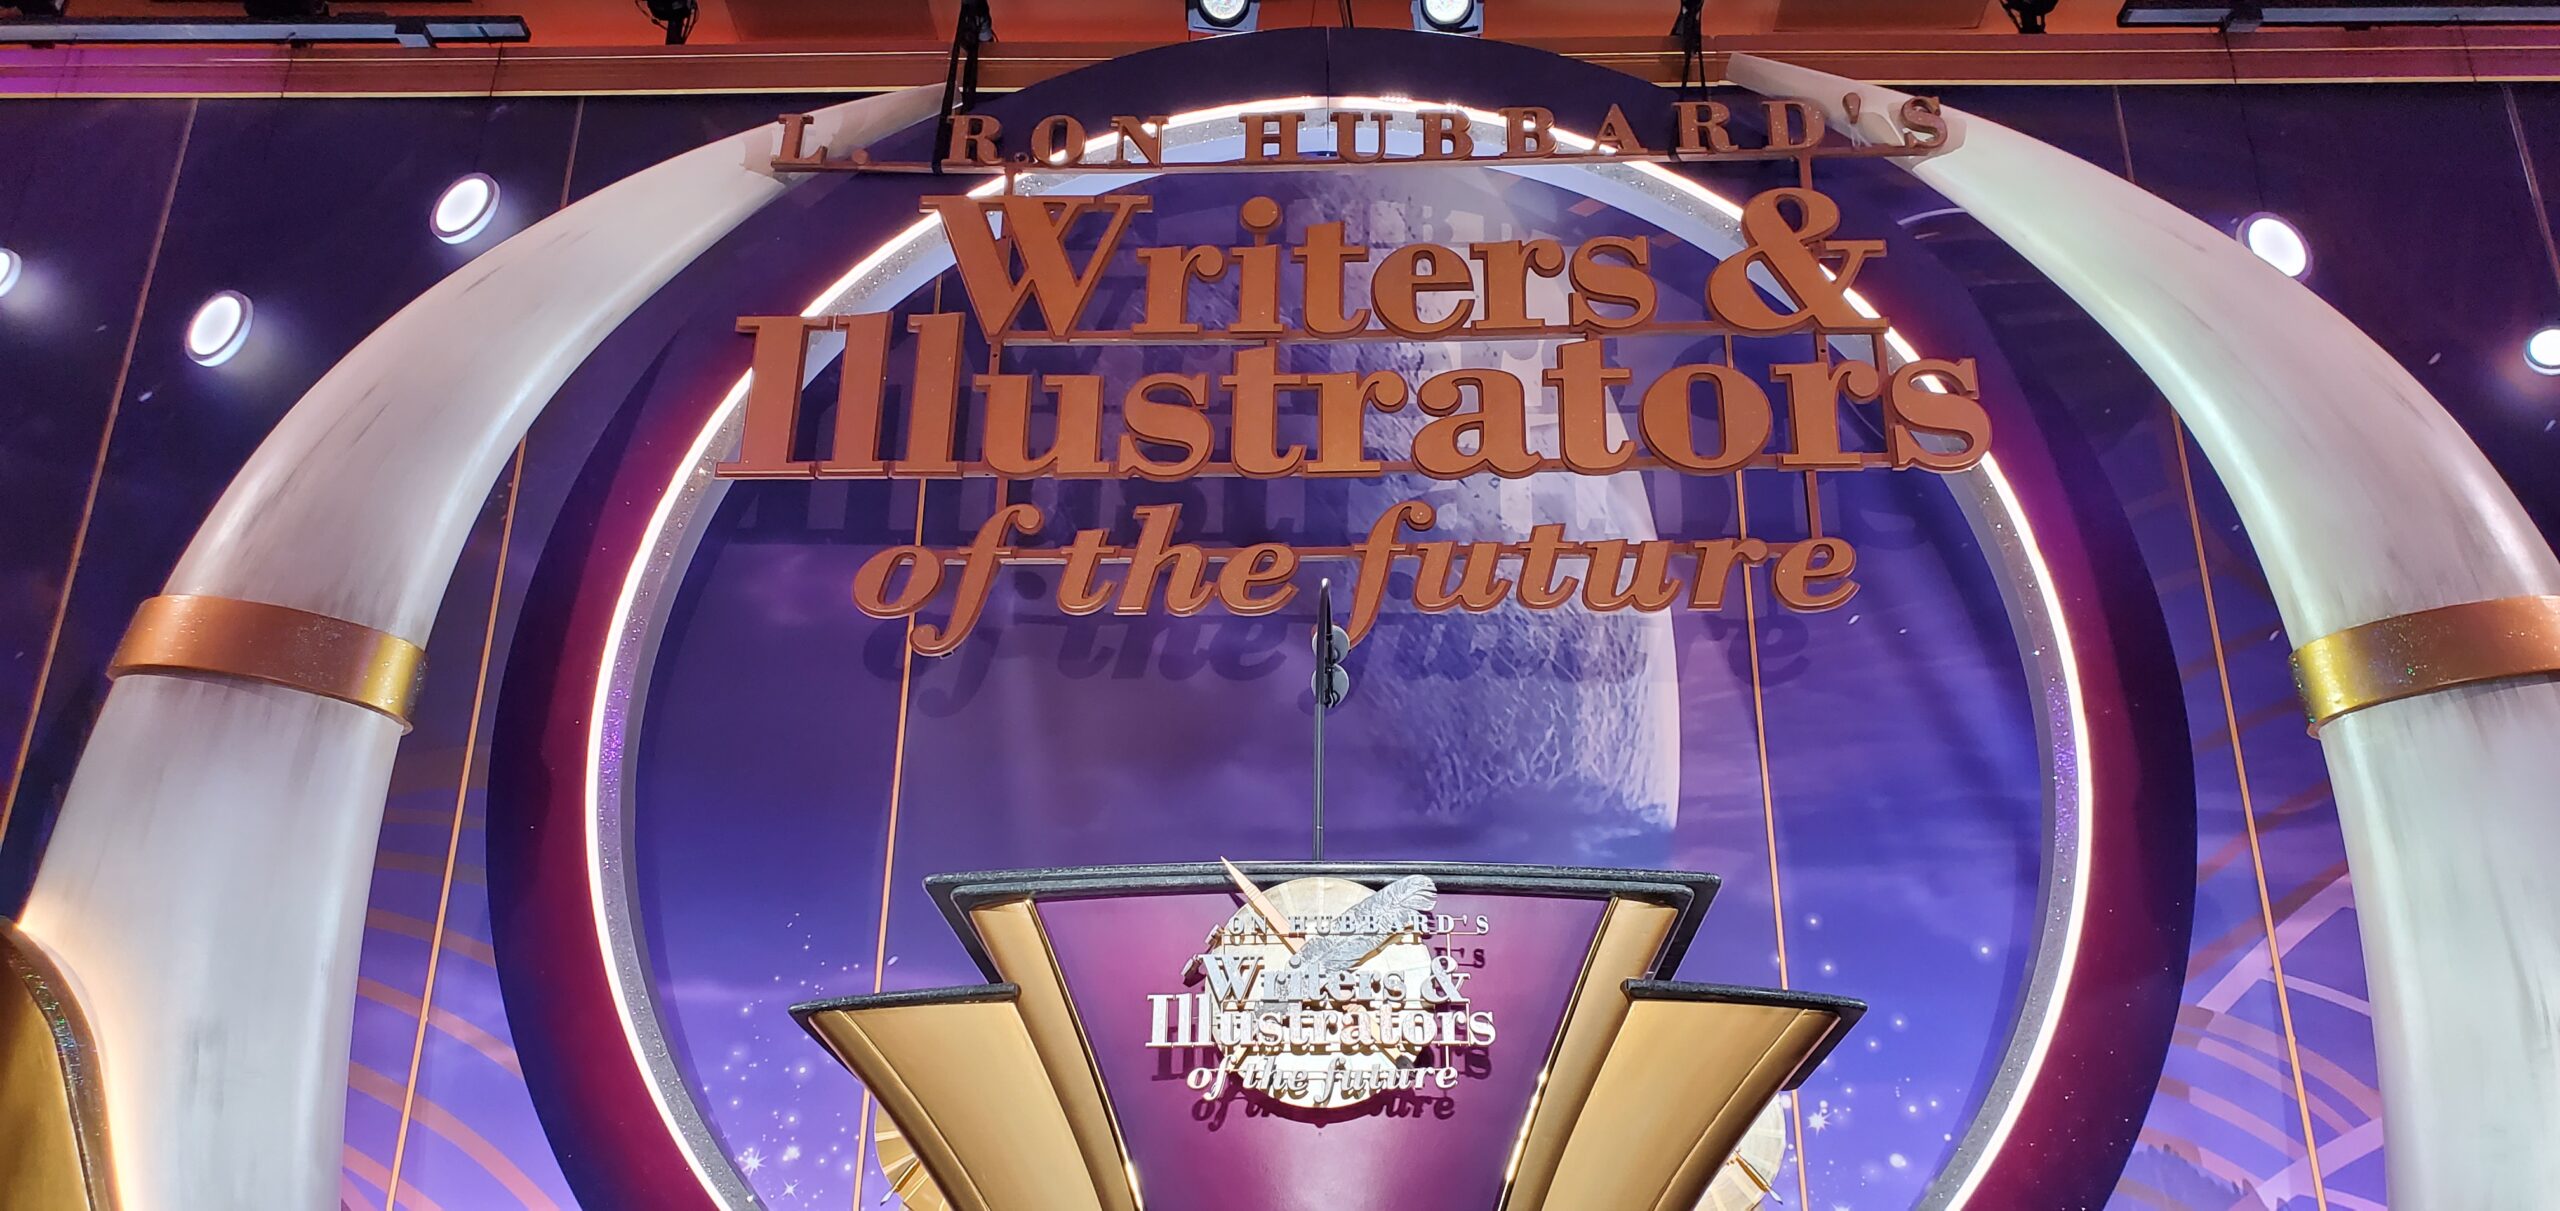 Writers and Illustrators of the Future